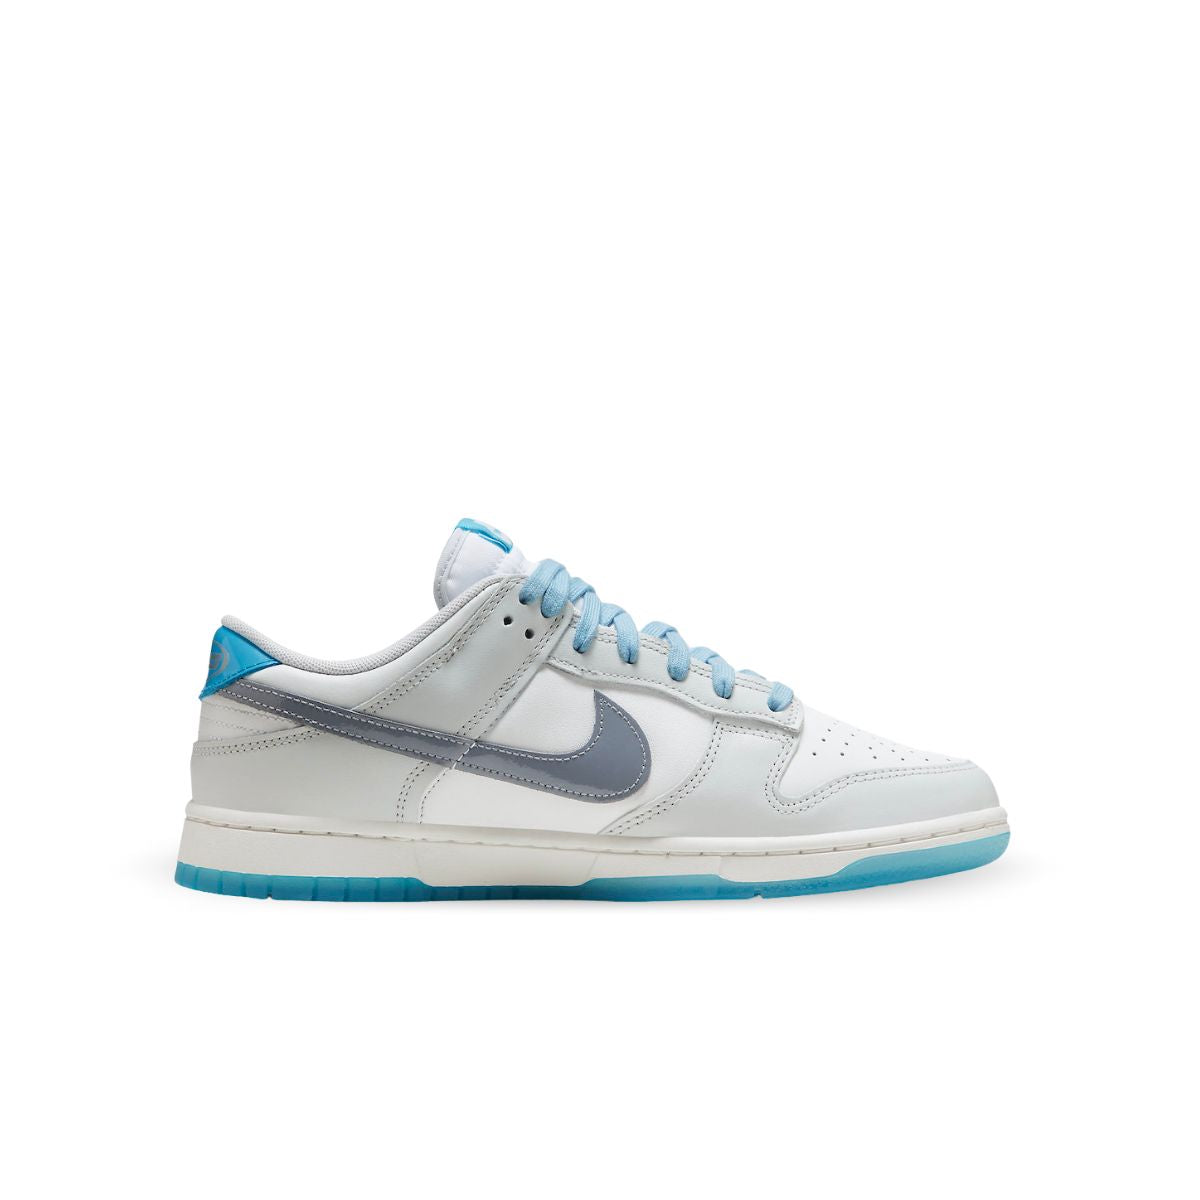 Nike, Dunks, Light Blue Shoelace, Replacements